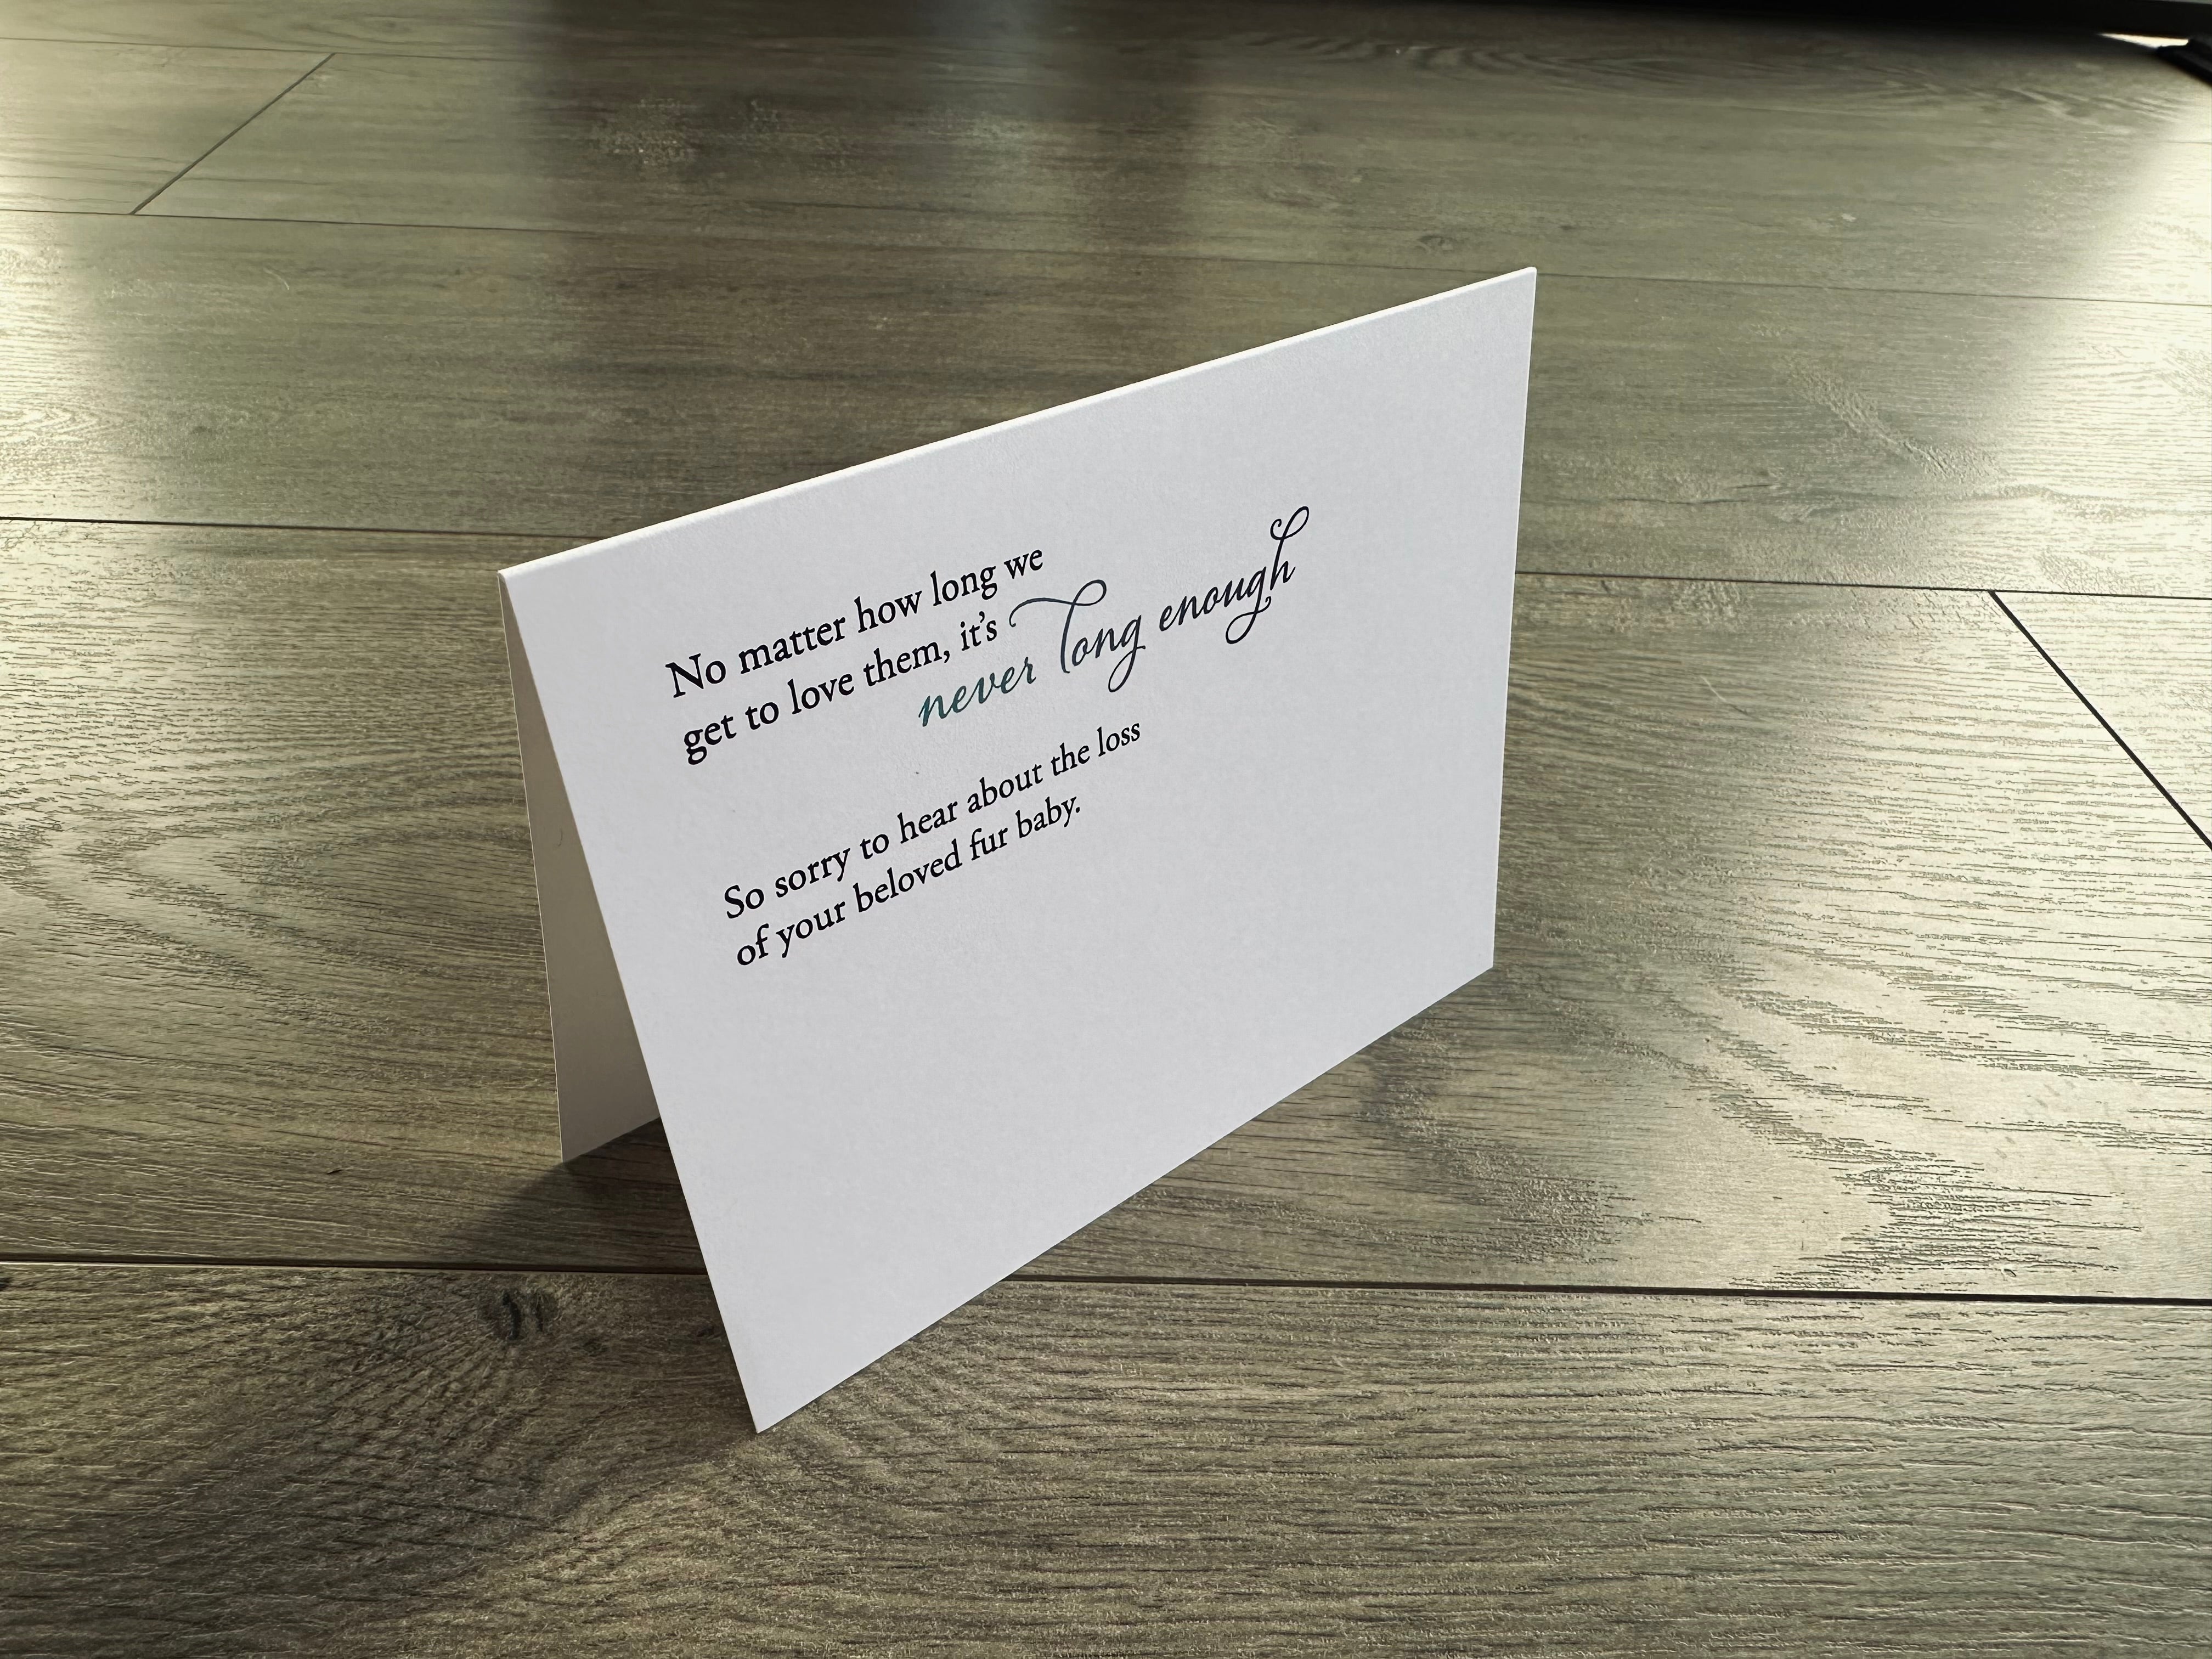 A folded white notecard is propped up and says, "No matter how long we get to love them, it's never long enough. So sorry to hear about the loss of your beloved fur baby." on the front. Loss of Pet by Stationare.